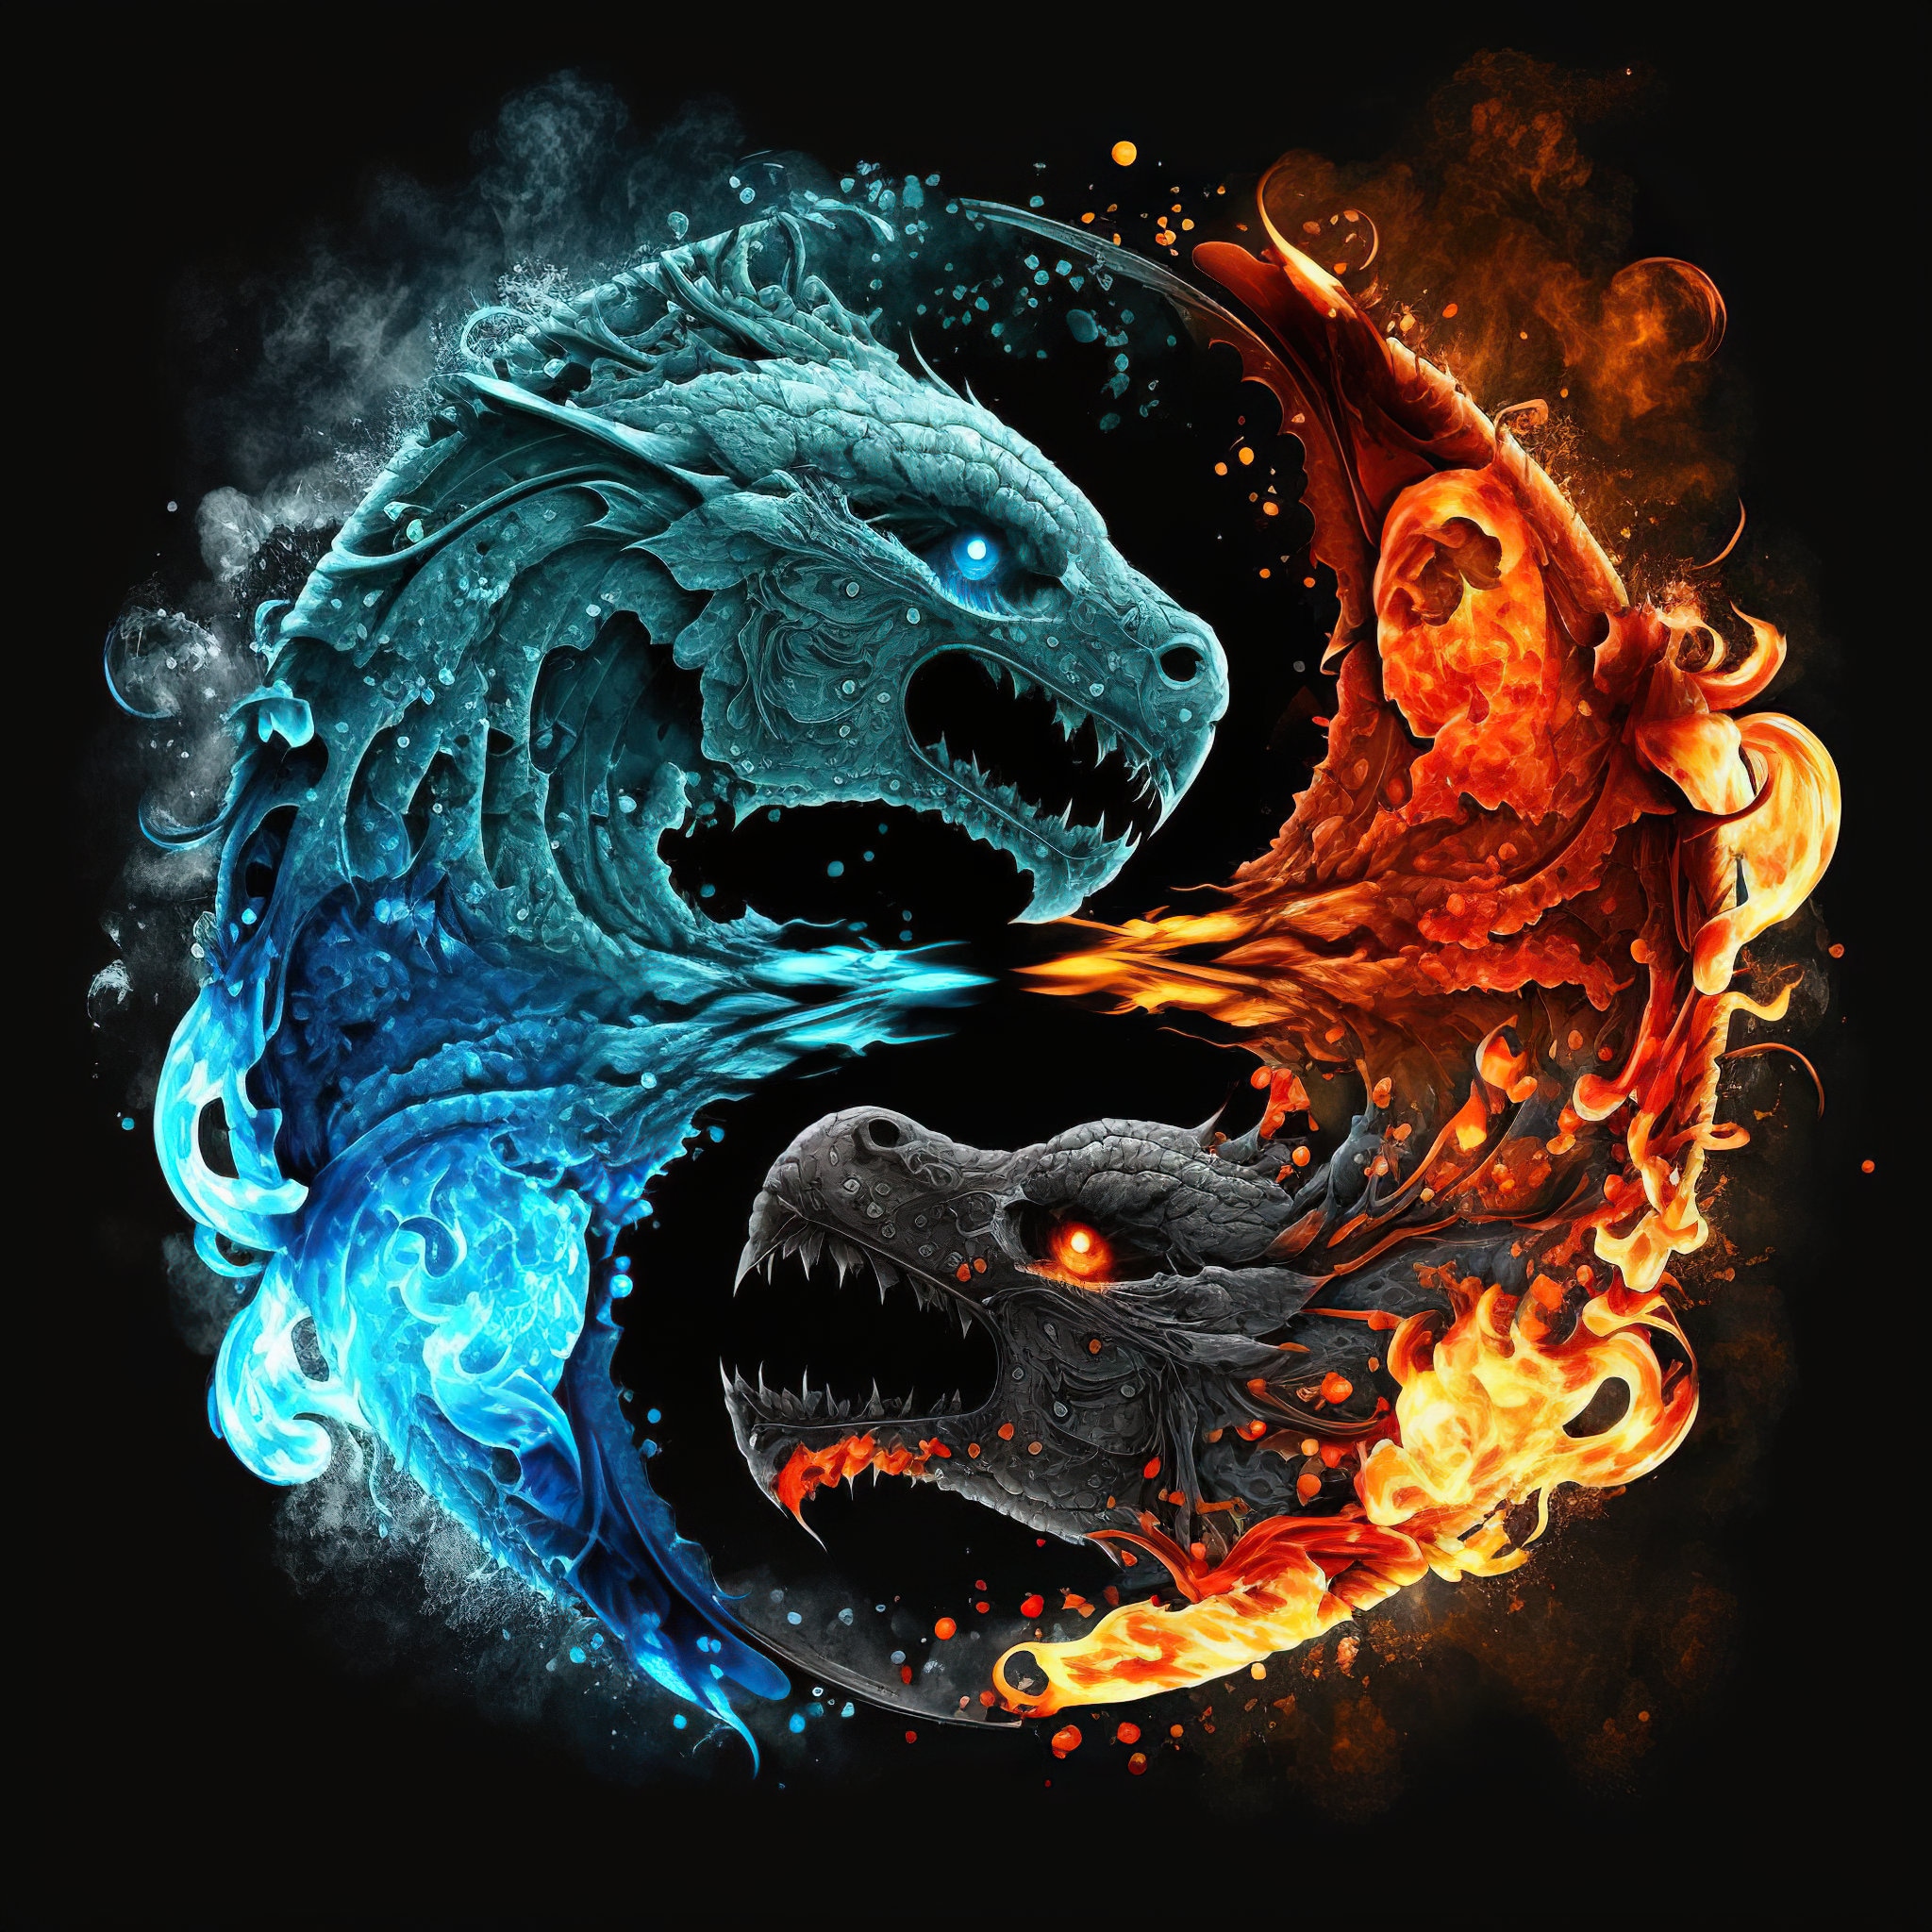 Ice and Fire Dragons Download, Ice